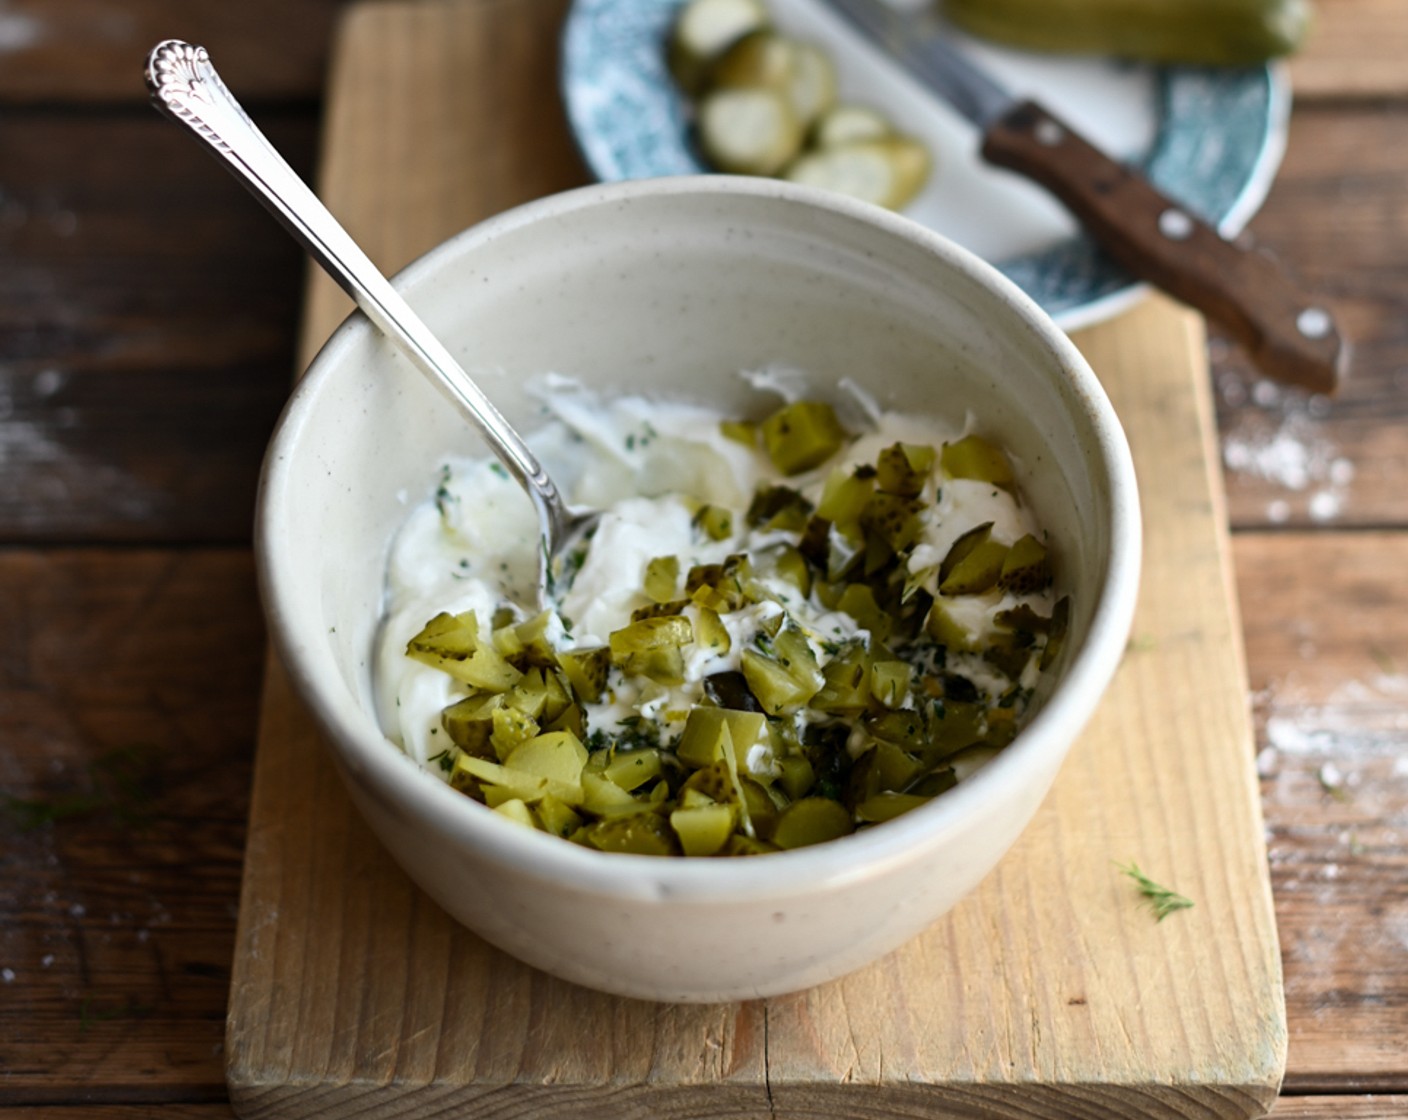 step 7 To make the dill yoghurt, combine the Fresh Dill (3 sprigs), Lemon (1/2), and Garlic (1 clove) with the Greek Yogurt (1 cup).